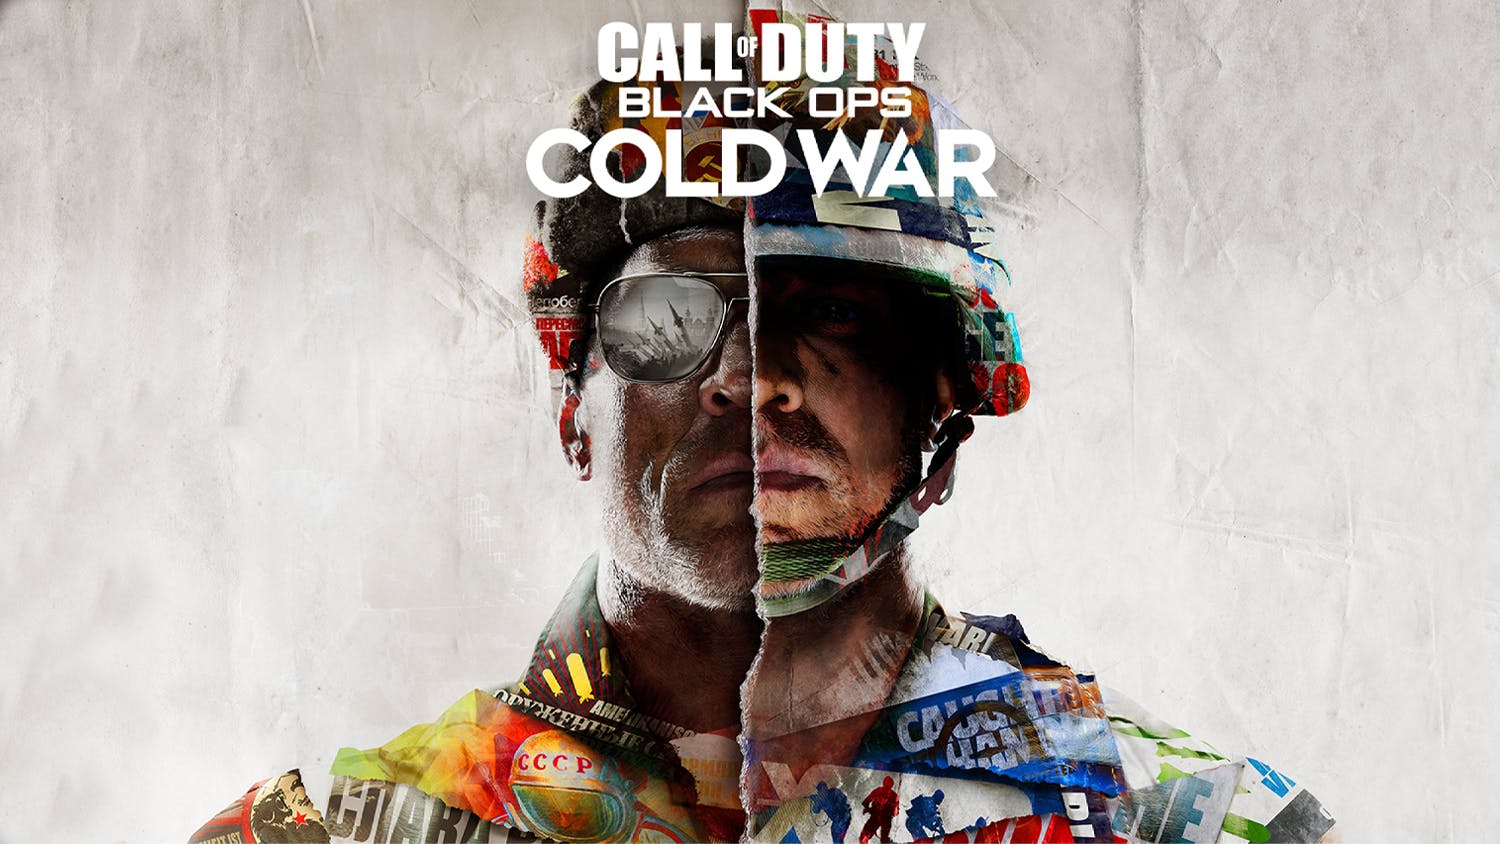 PS5 - Call of Duty Black Ops: Cold War (R16)